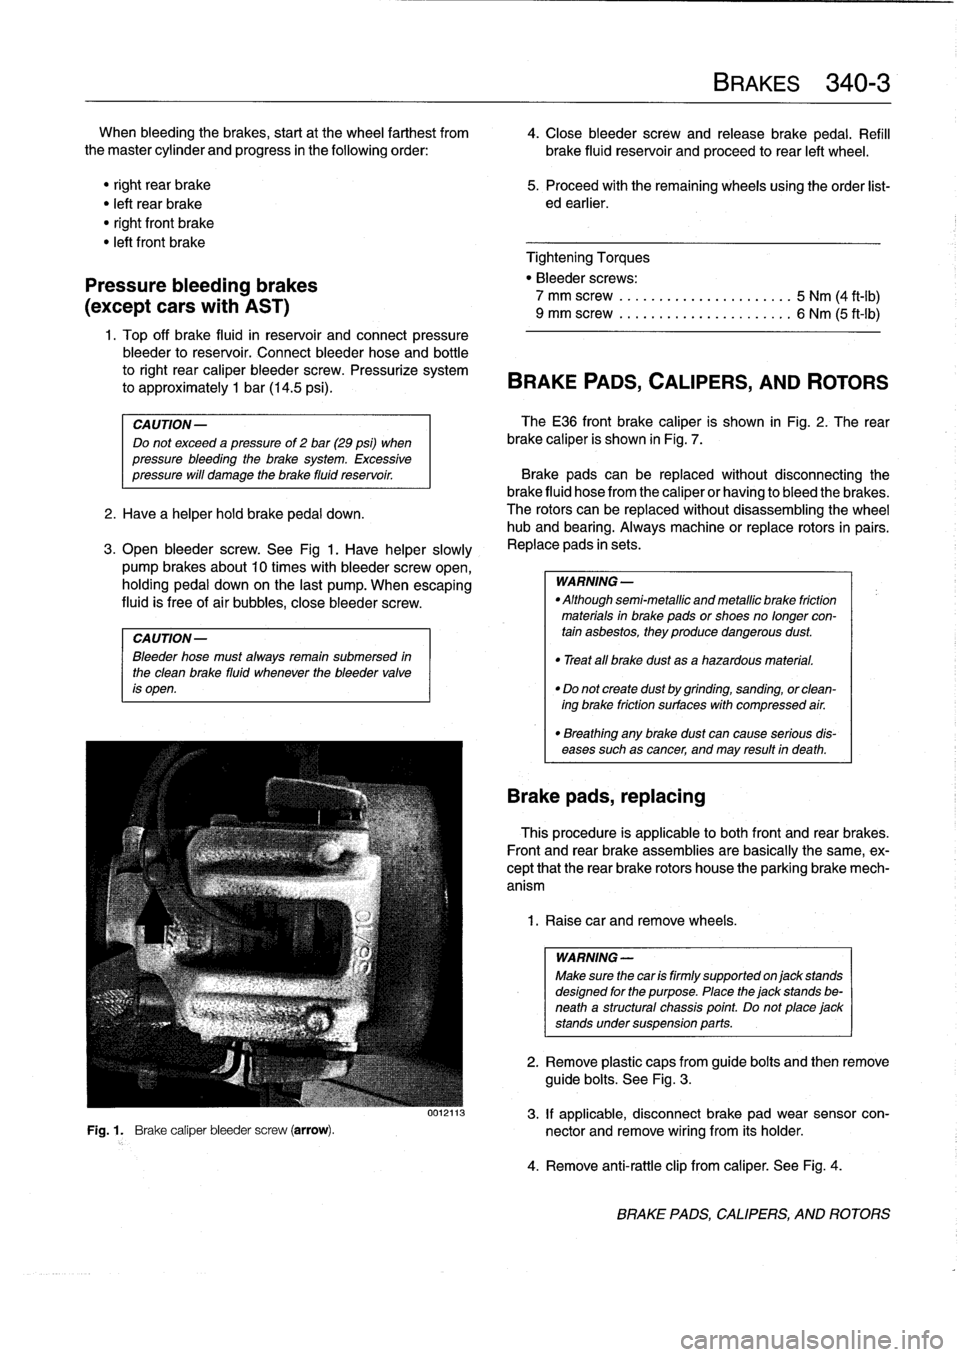 BMW 318i 1997 E36 Workshop Manual 
When
bleeding
the
brakes,
startat
the
wheel
farthest
from

	

4
.
Close
bleeder
screw
and
release
brake
pedal
.
Refill
the
master
cylinder
and
progress
in
the
following
order
:

	

brake
fluid
reserv